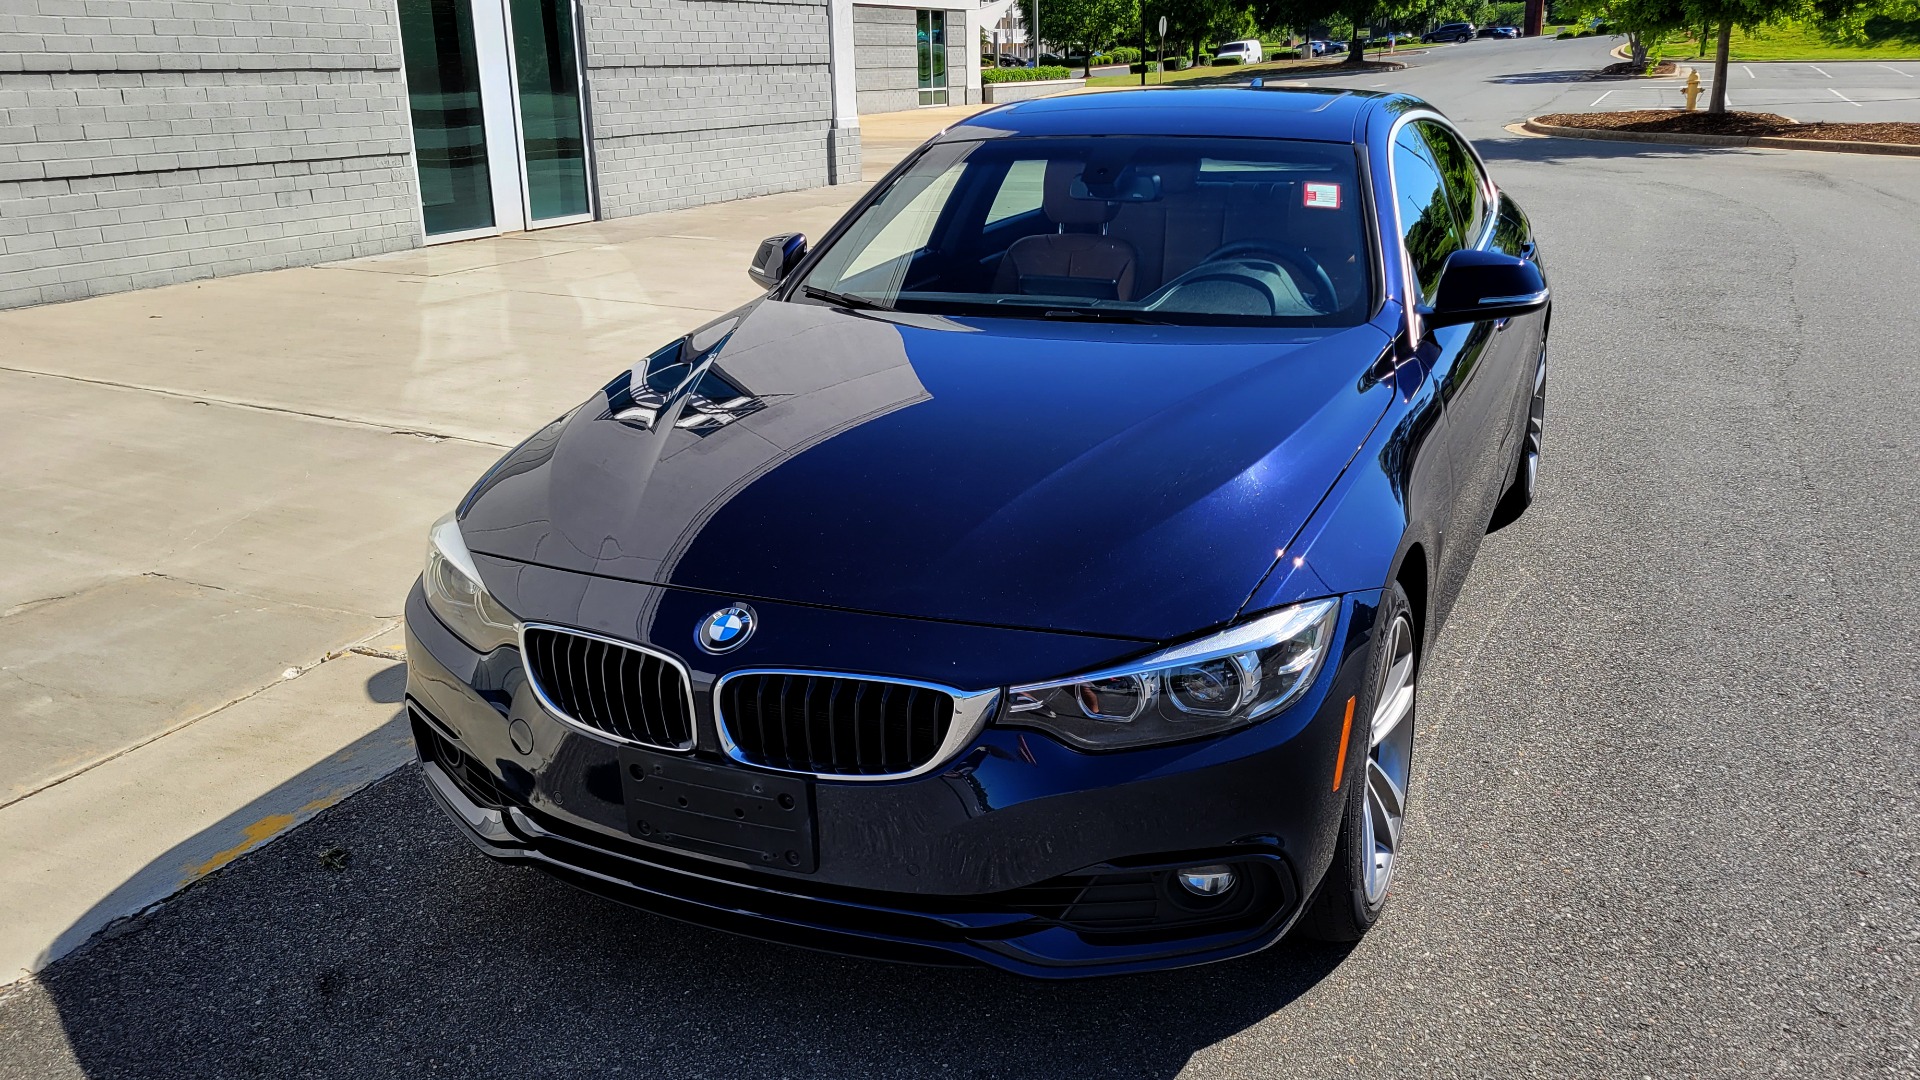 Used 2019 BMW 4 SERIES 440I XDRIVE GRAN COUPE / 3.0L / CONV PKG / HTD STS / REARVIEW for sale $33,999 at Formula Imports in Charlotte NC 28227 2